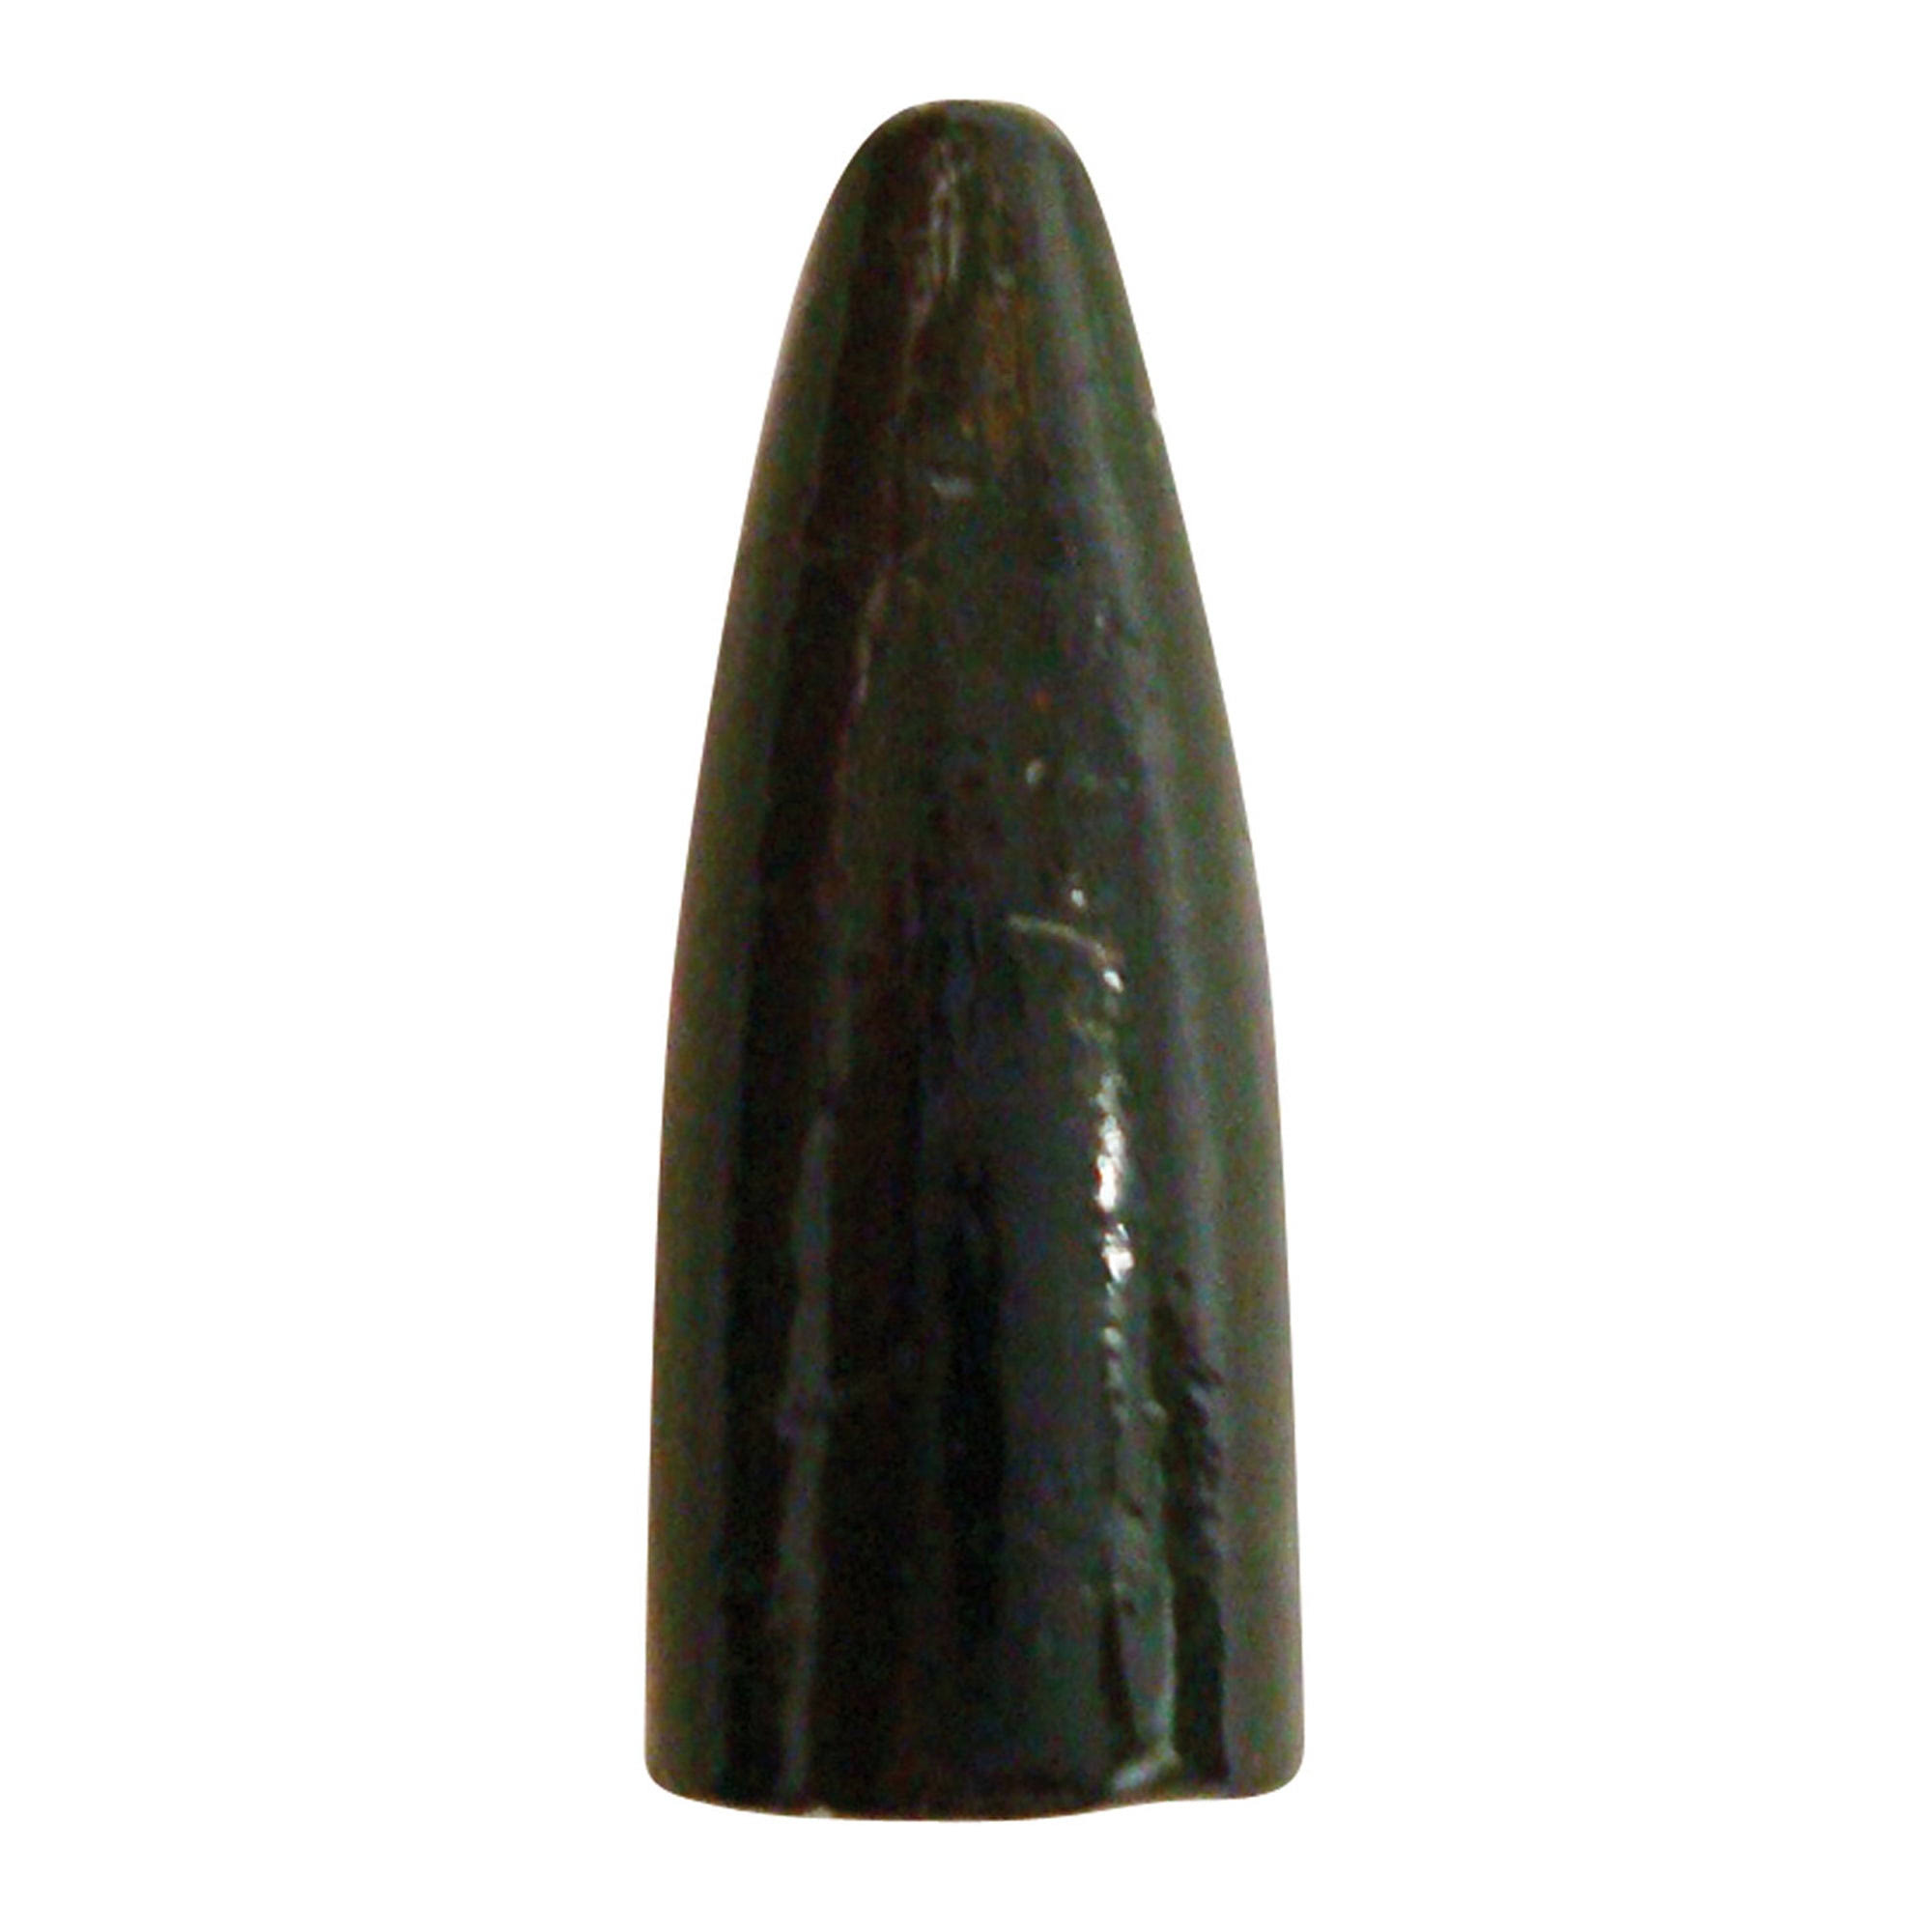 Bullet Weight Worm Weights - Black Lead, 1/8oz